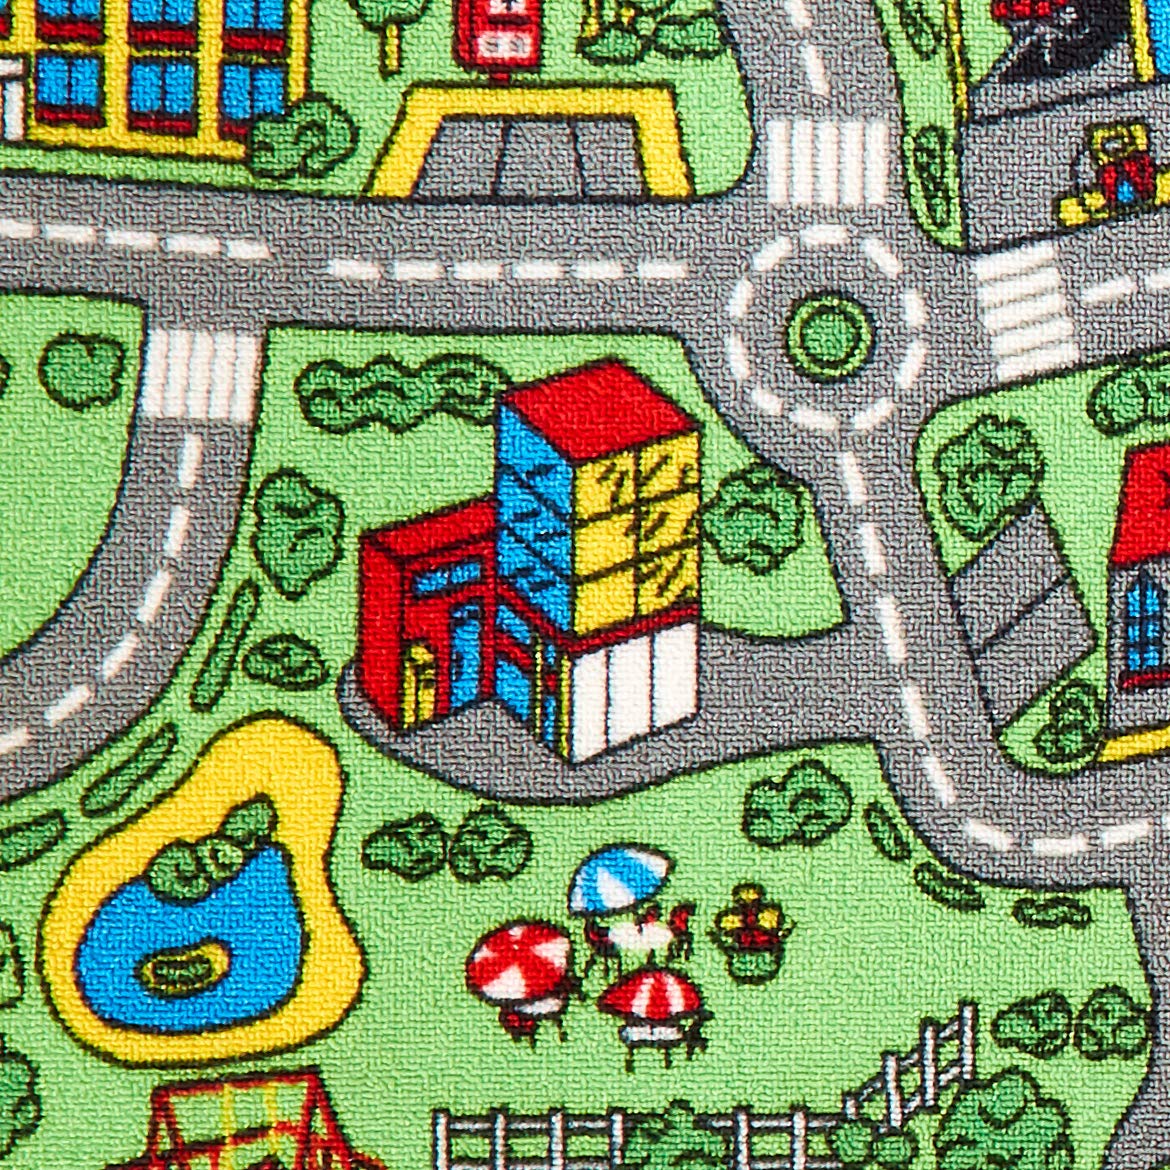 Click N’ Play City Life Kids Road Traffic Play mat Rug Large Non-Slip Carpet Fun Educational for Play area Playroom Bedroom-59” x 31 1/2”